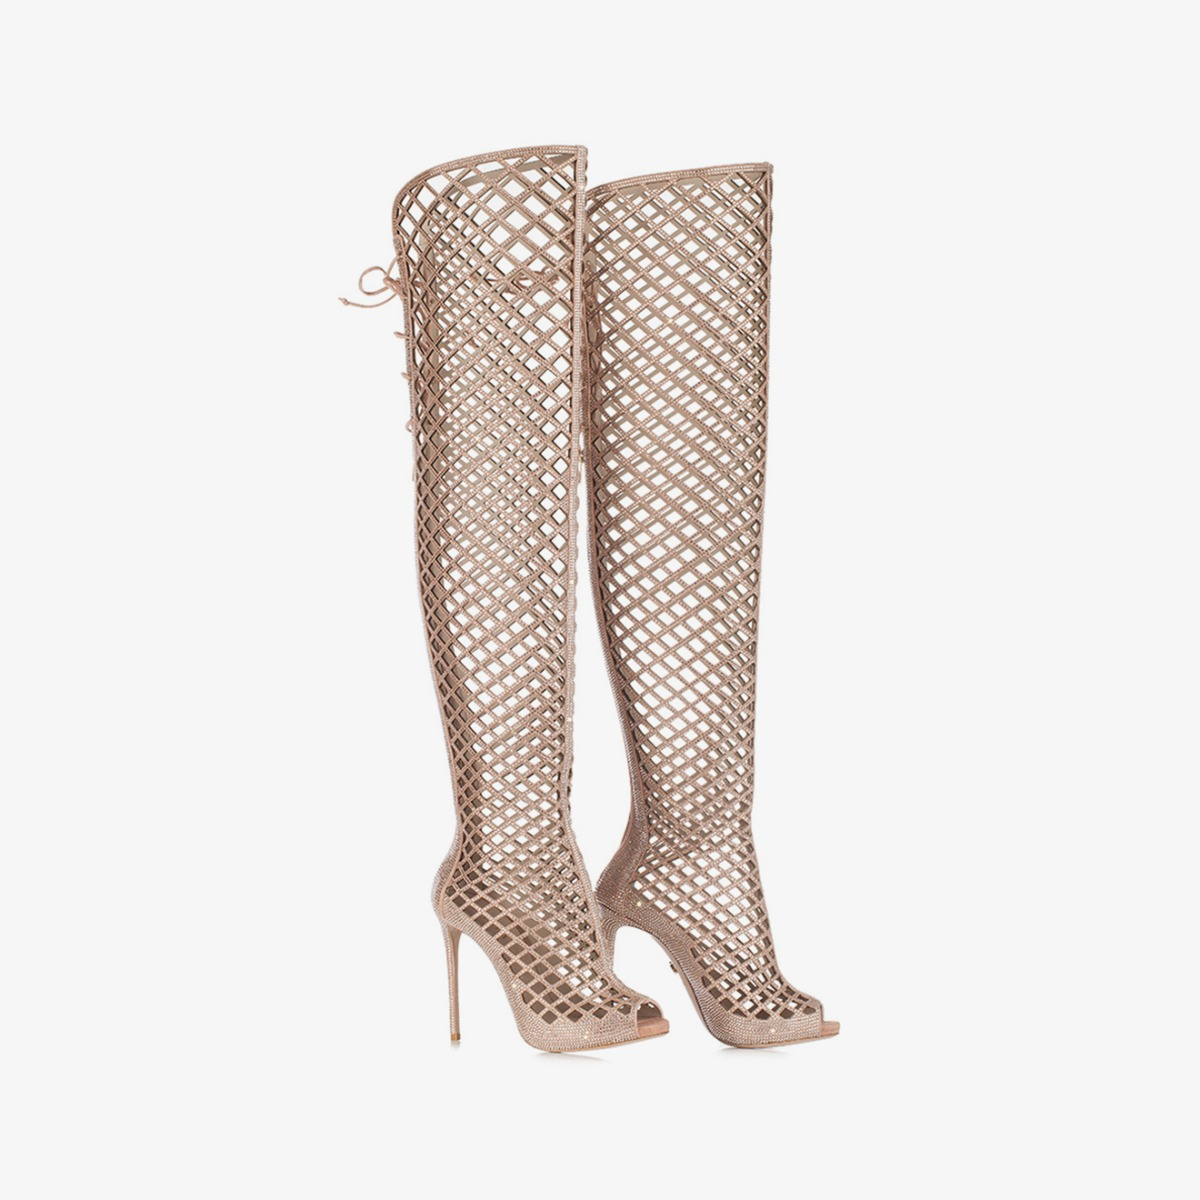 DITA BOOT 110 mm - Le Silla official outlet